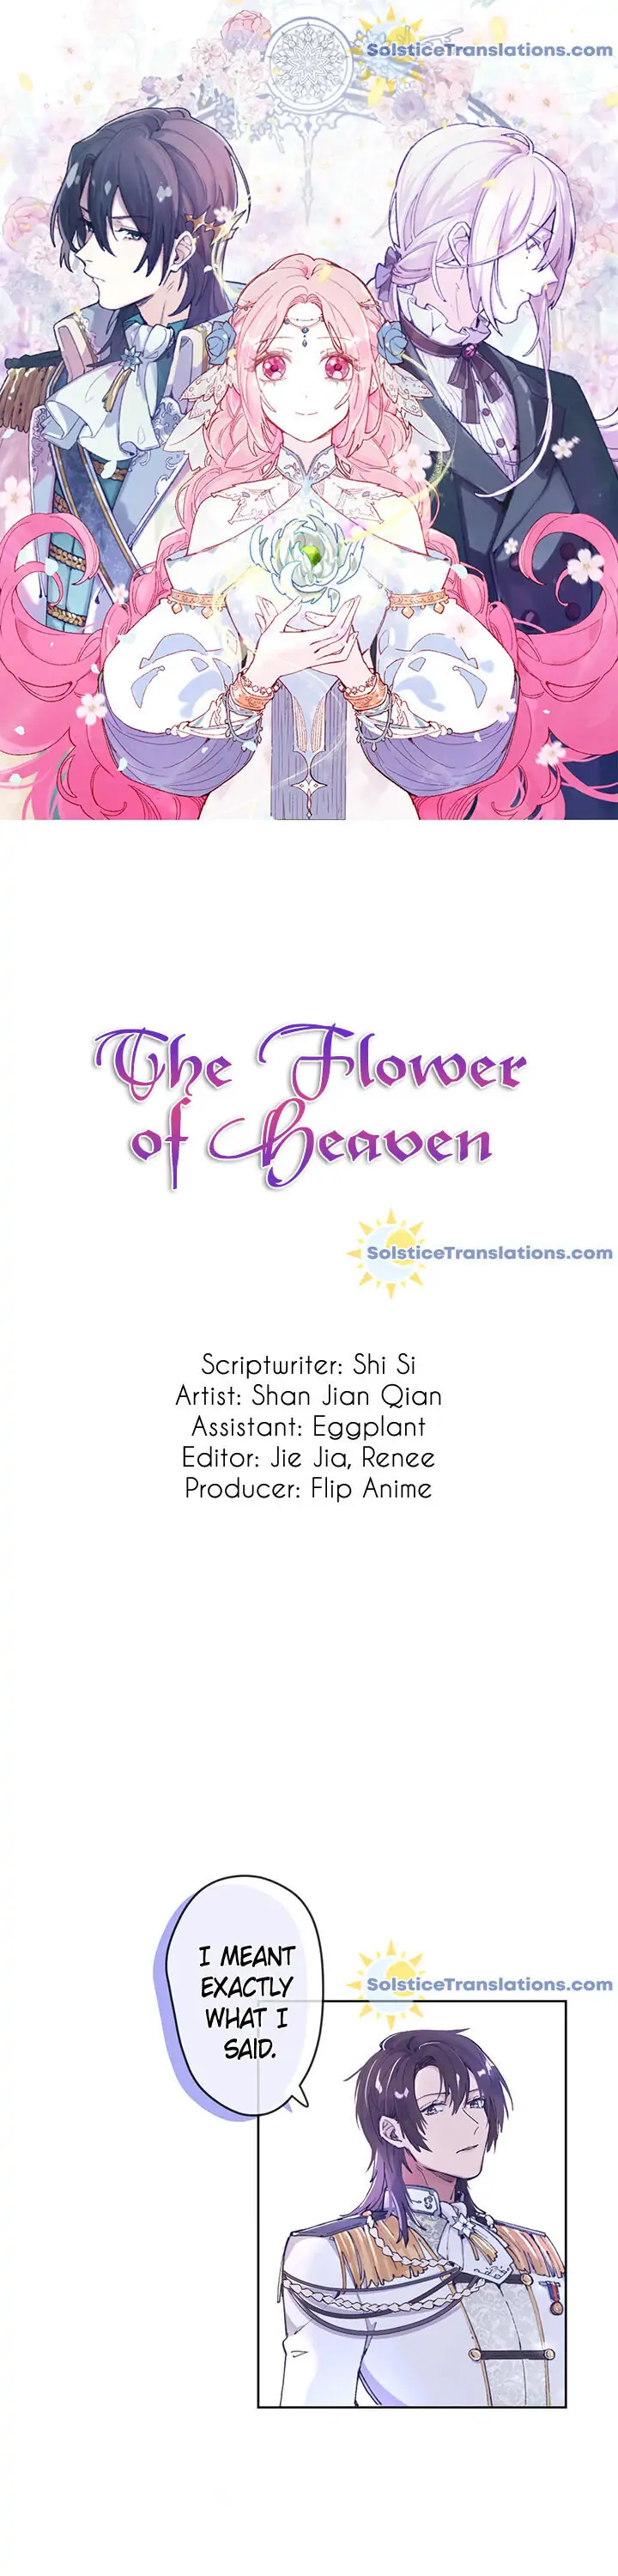 The Flower of Heaven chapter 2